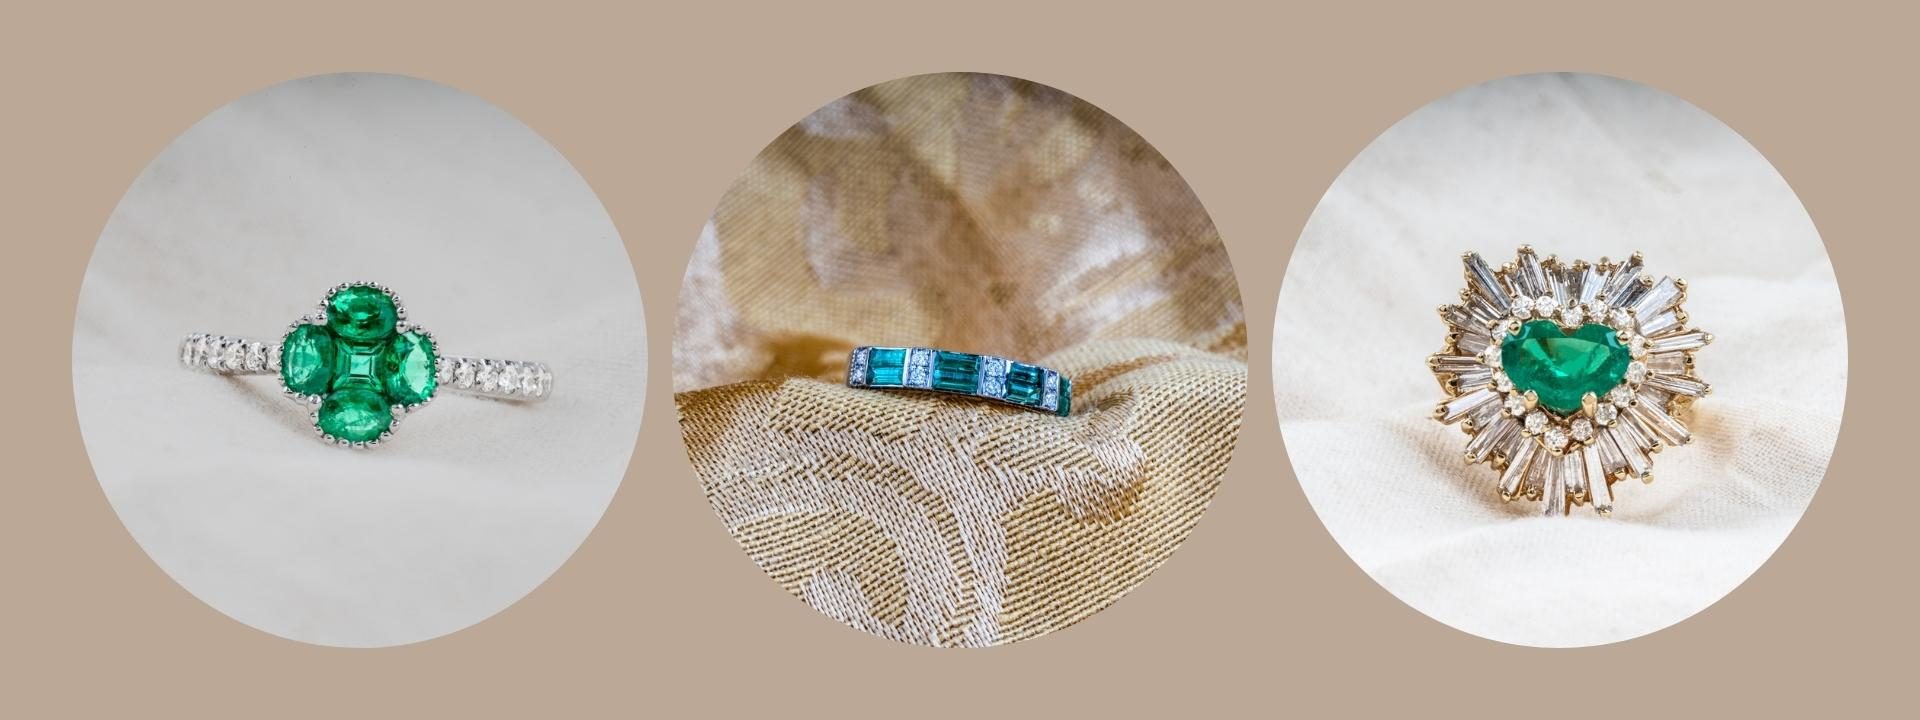 Three statement rings in yellow and white gold set with various gemstones and diamonds on fabric backgrounds.